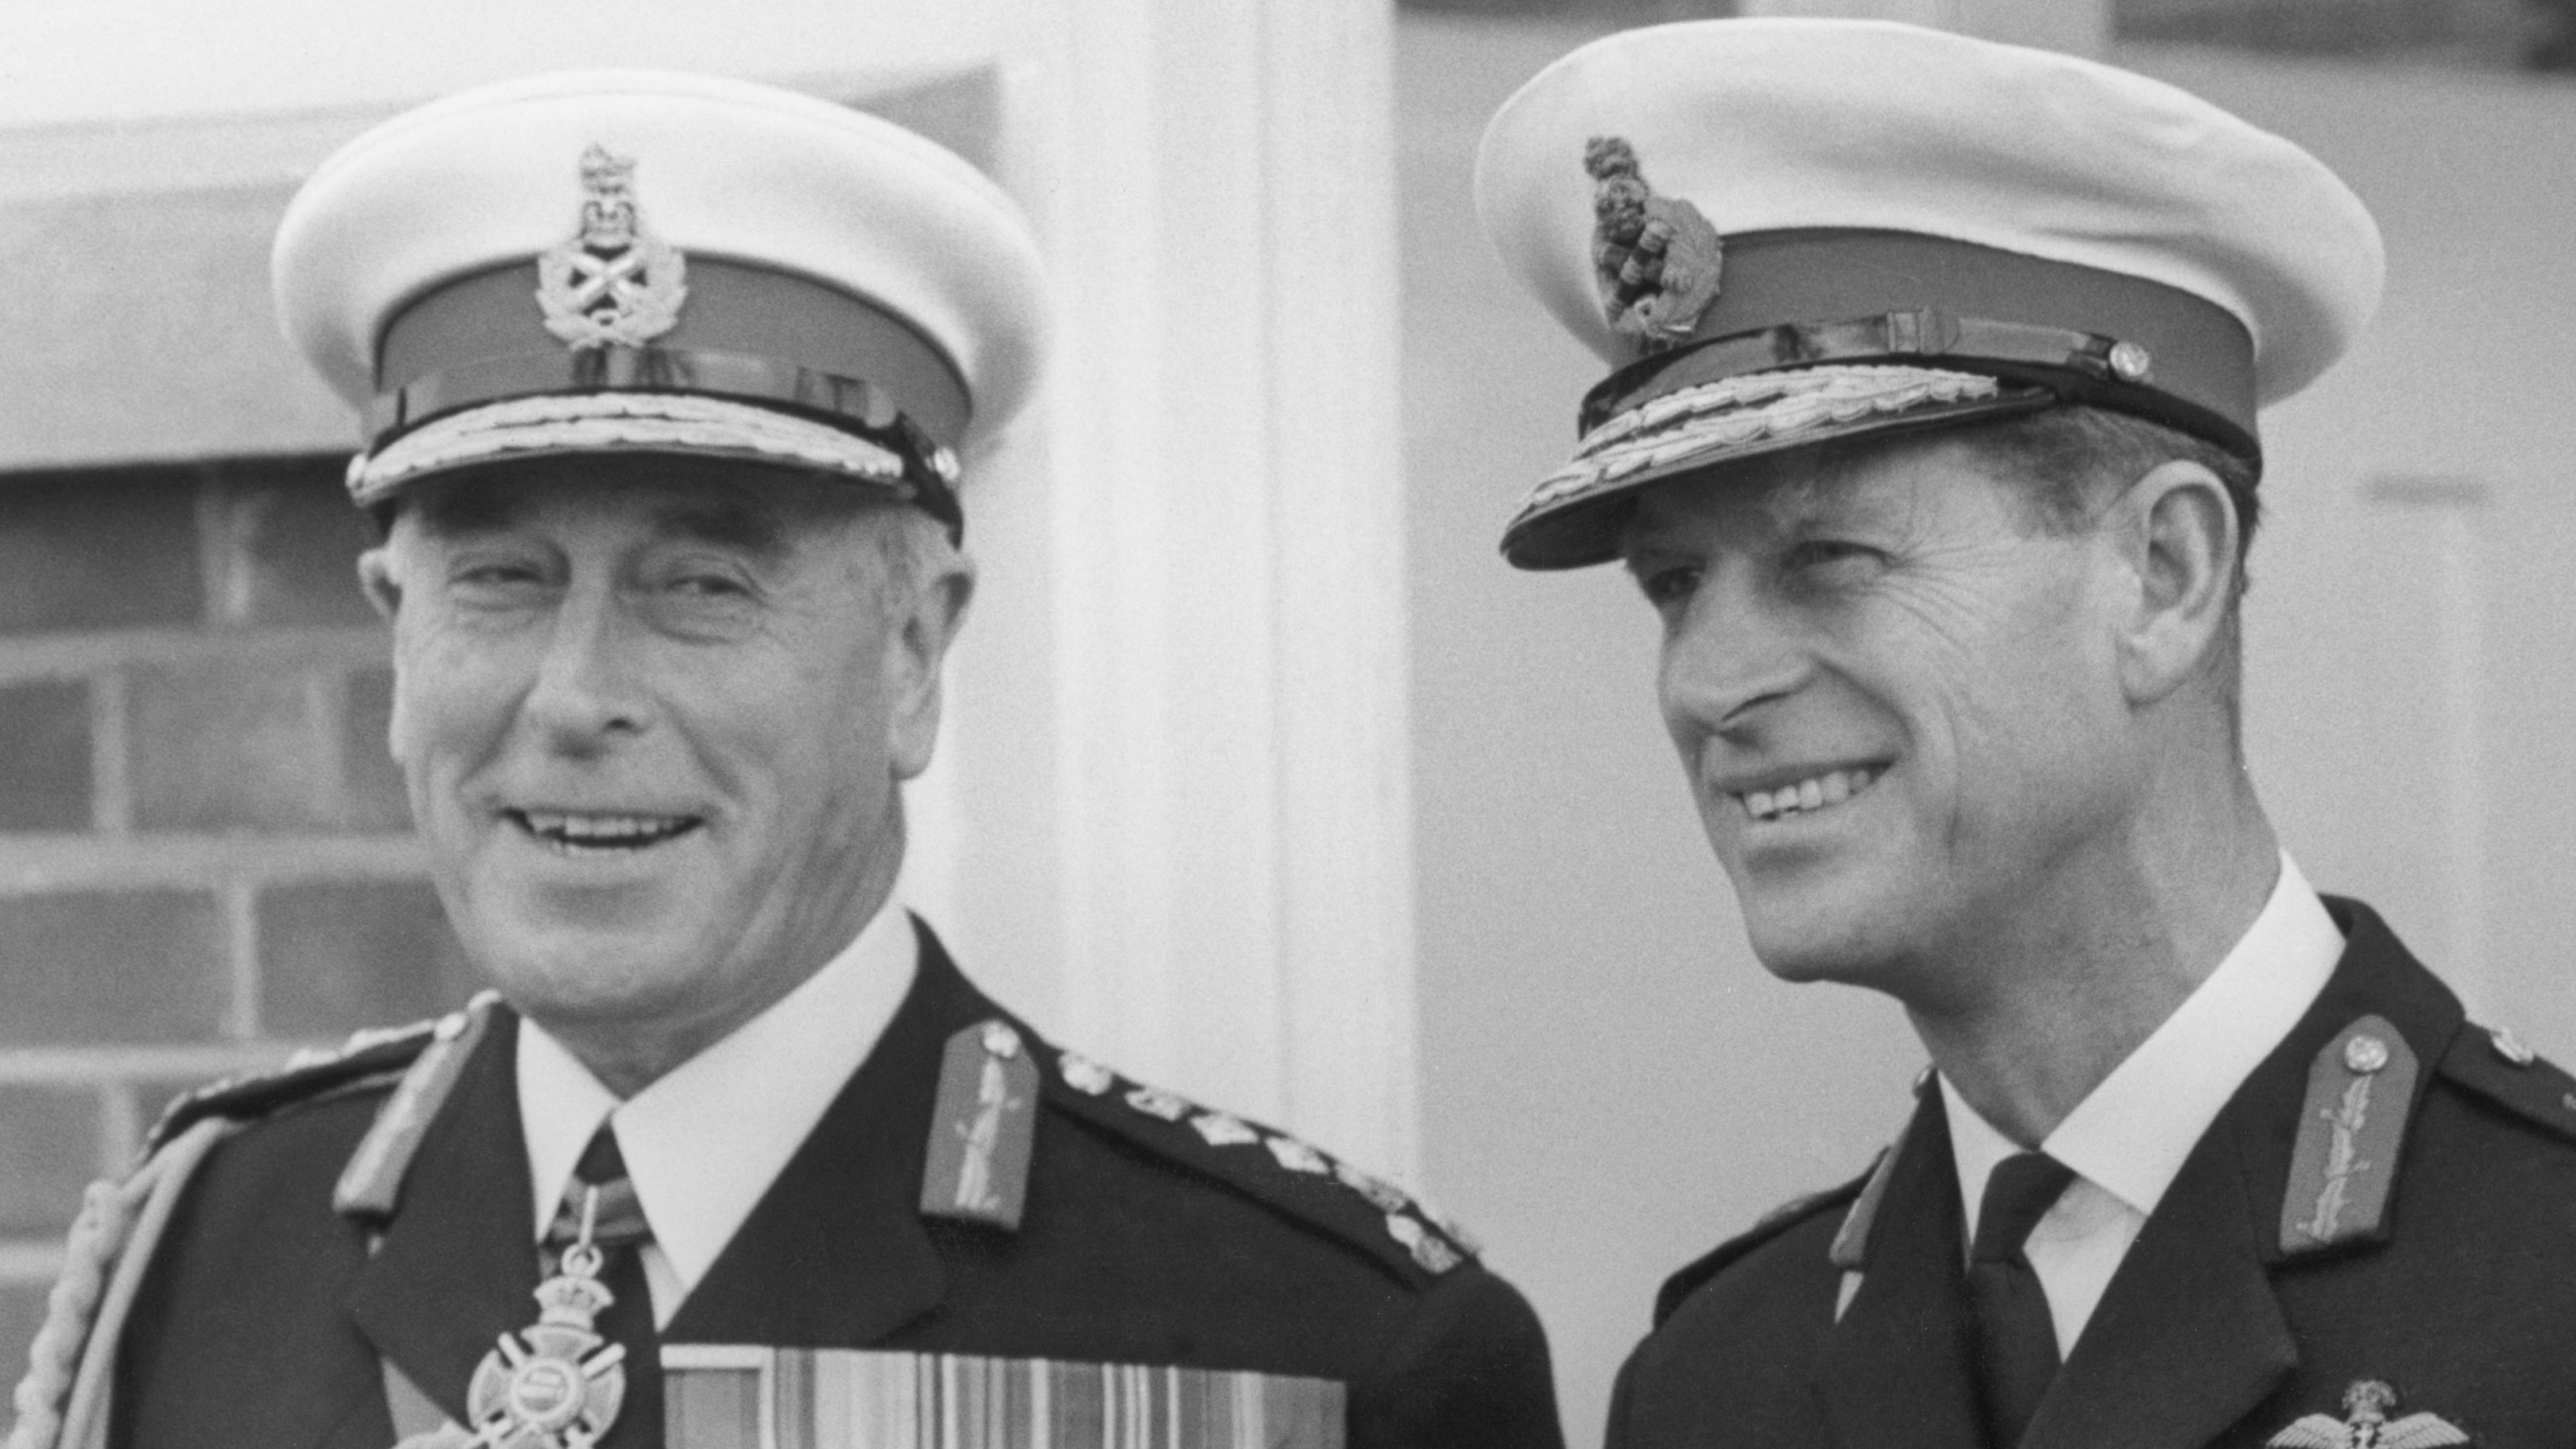 Mountbatten with Prince Philip